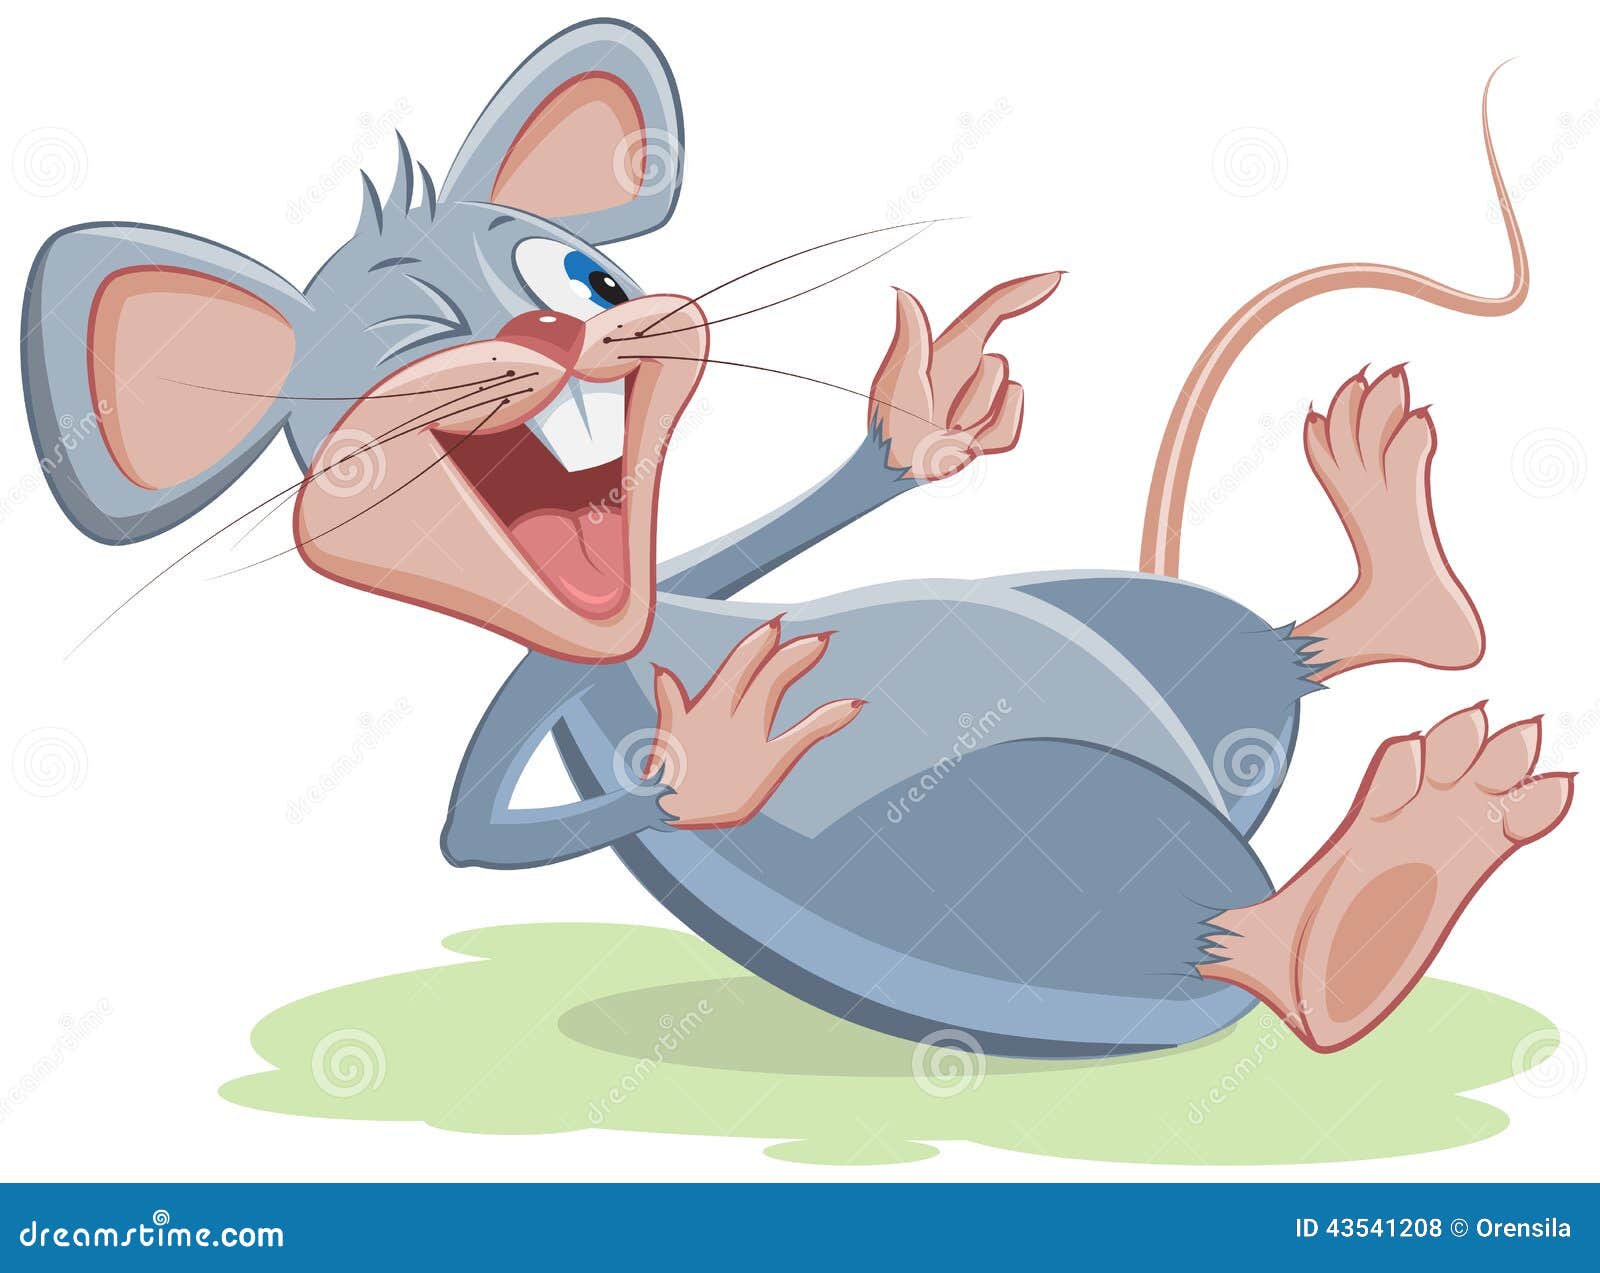 gray mouse lies and laughs